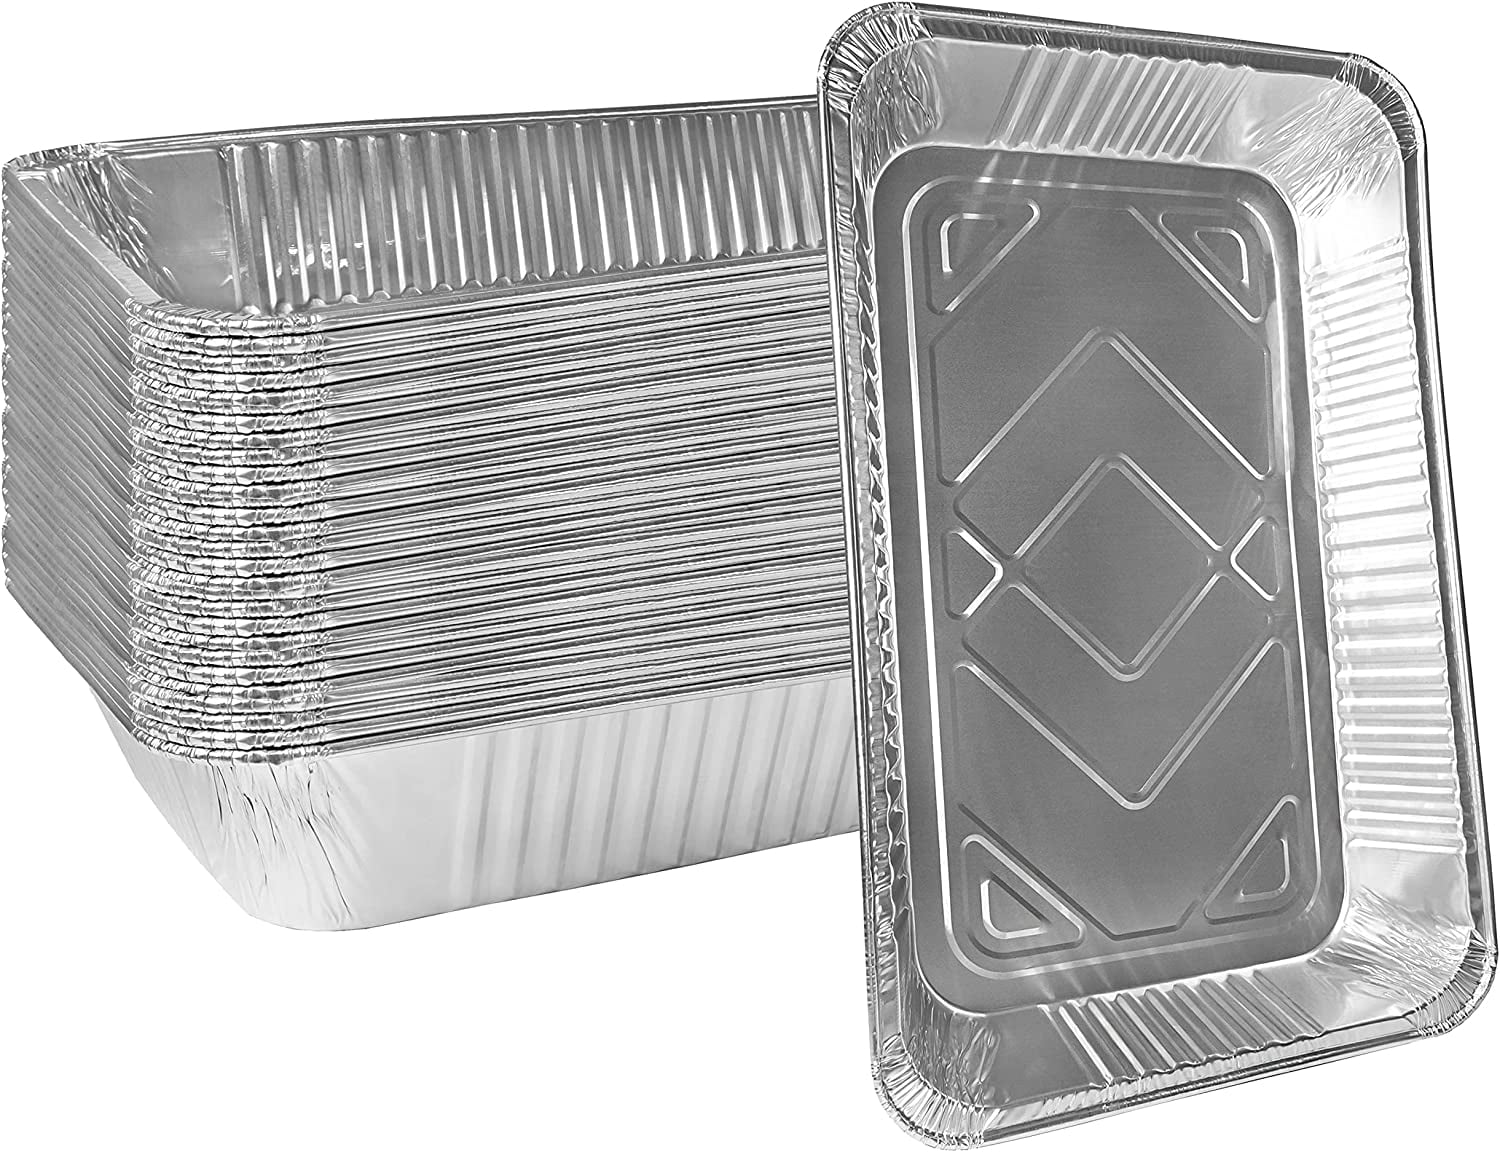 30-Pack Aluminum Half-Size Roasting Pans - Super-thick 9x13 Standard Size Chafing Pans Tins - Eco-Friendly Recyclable Aluminum - Portable Food